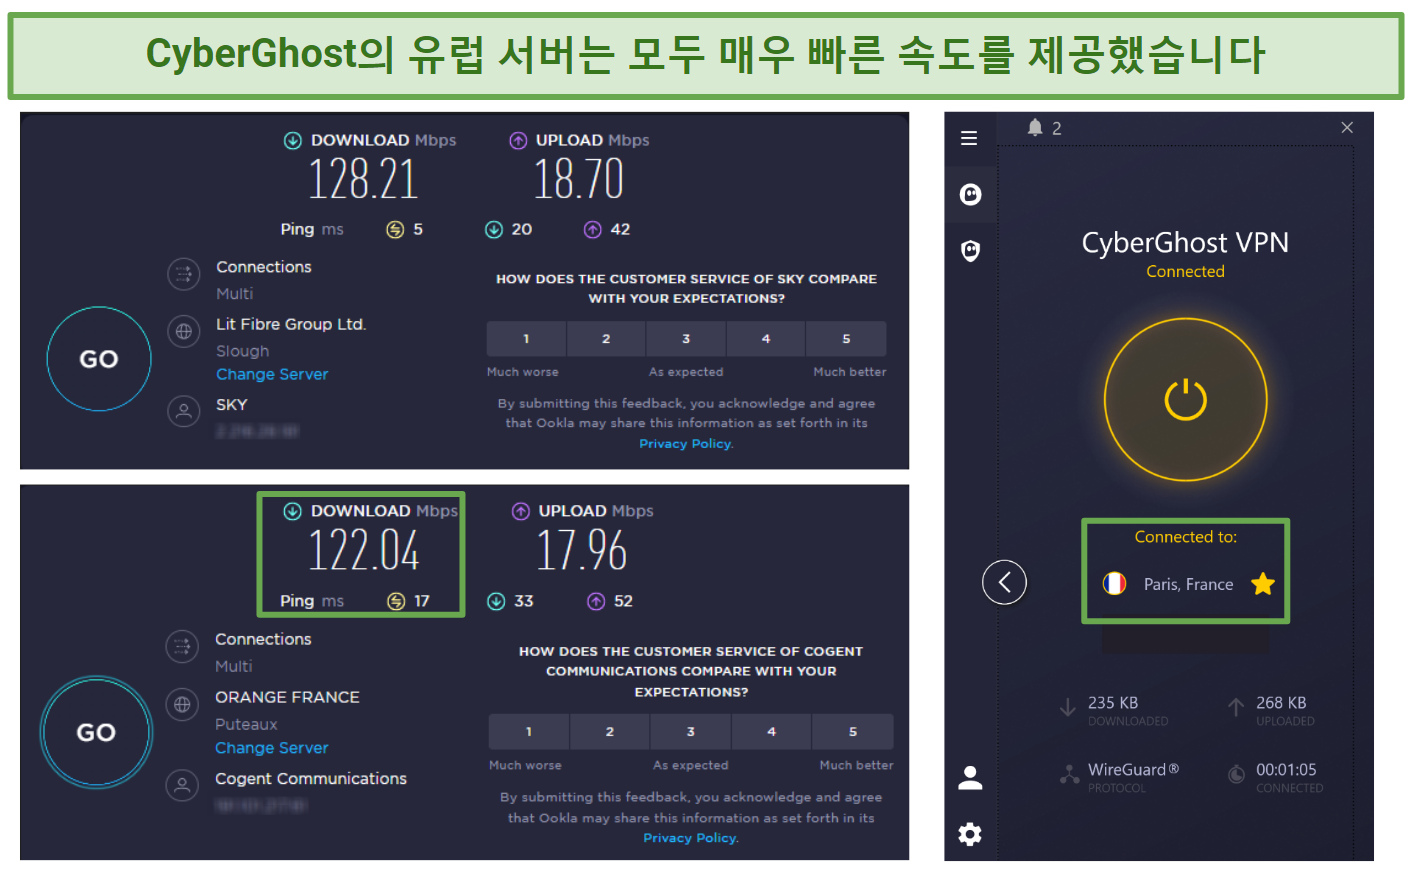 Screenshot of Ookla speed tests with no VPN connected and connected to CyberGhost's Paris server